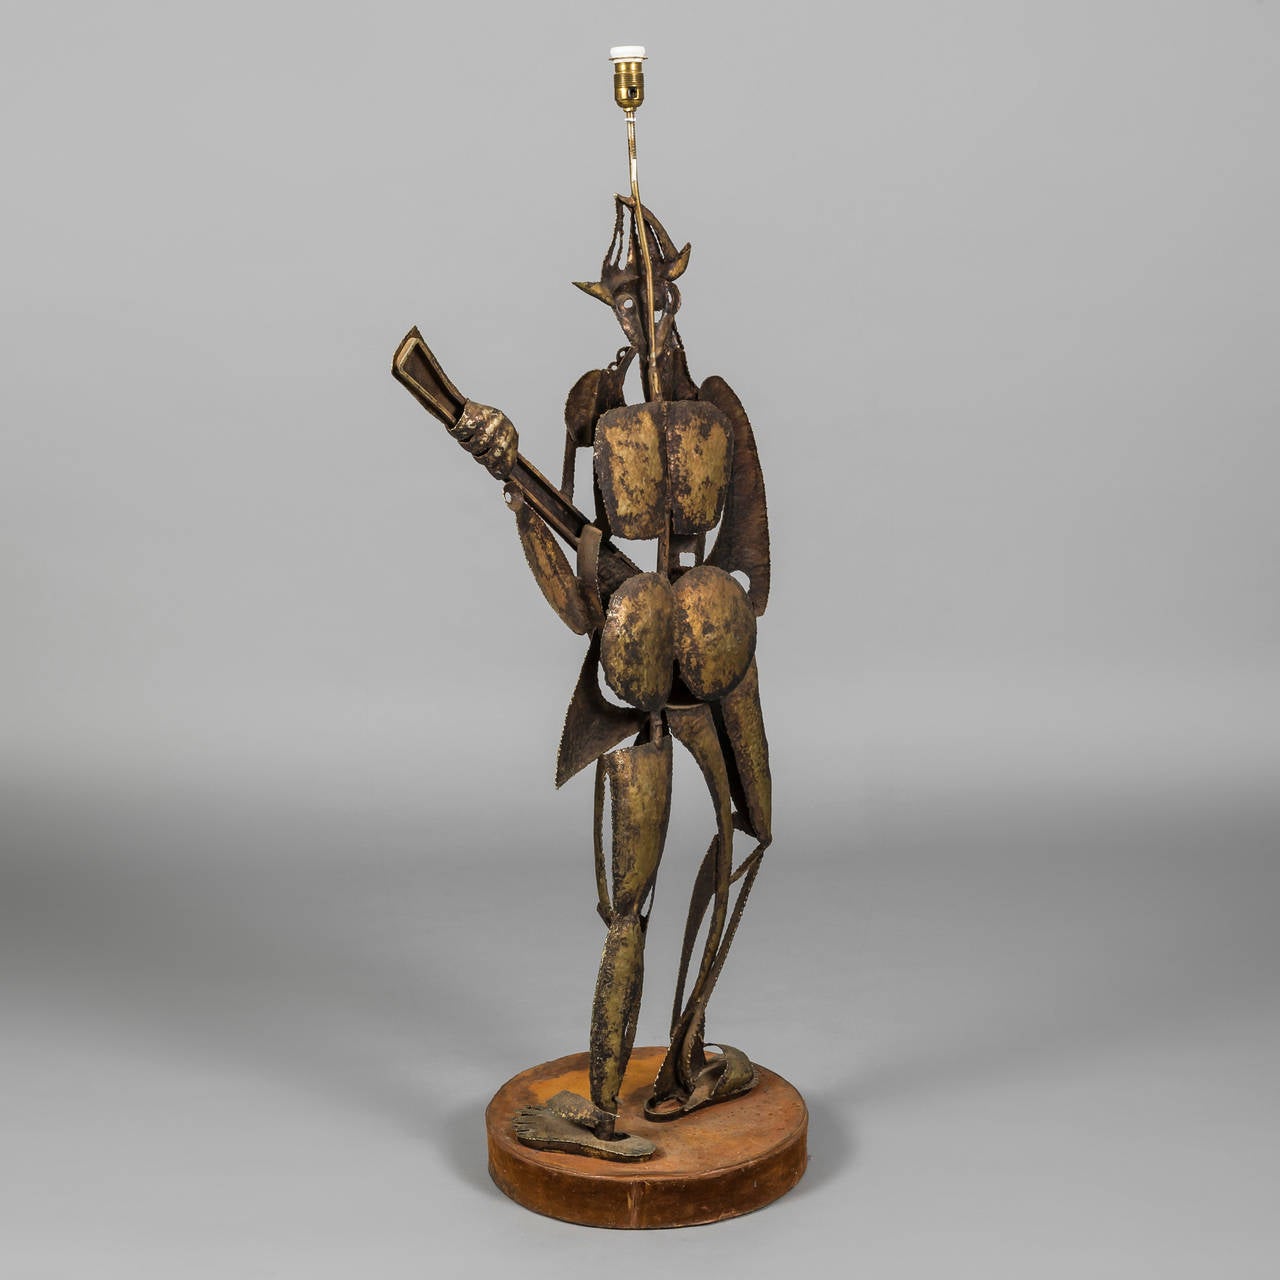 Metalwork 1950s Spanish Floor Lamp Inspired by Picasso's Harlequin Holding a Guitar For Sale